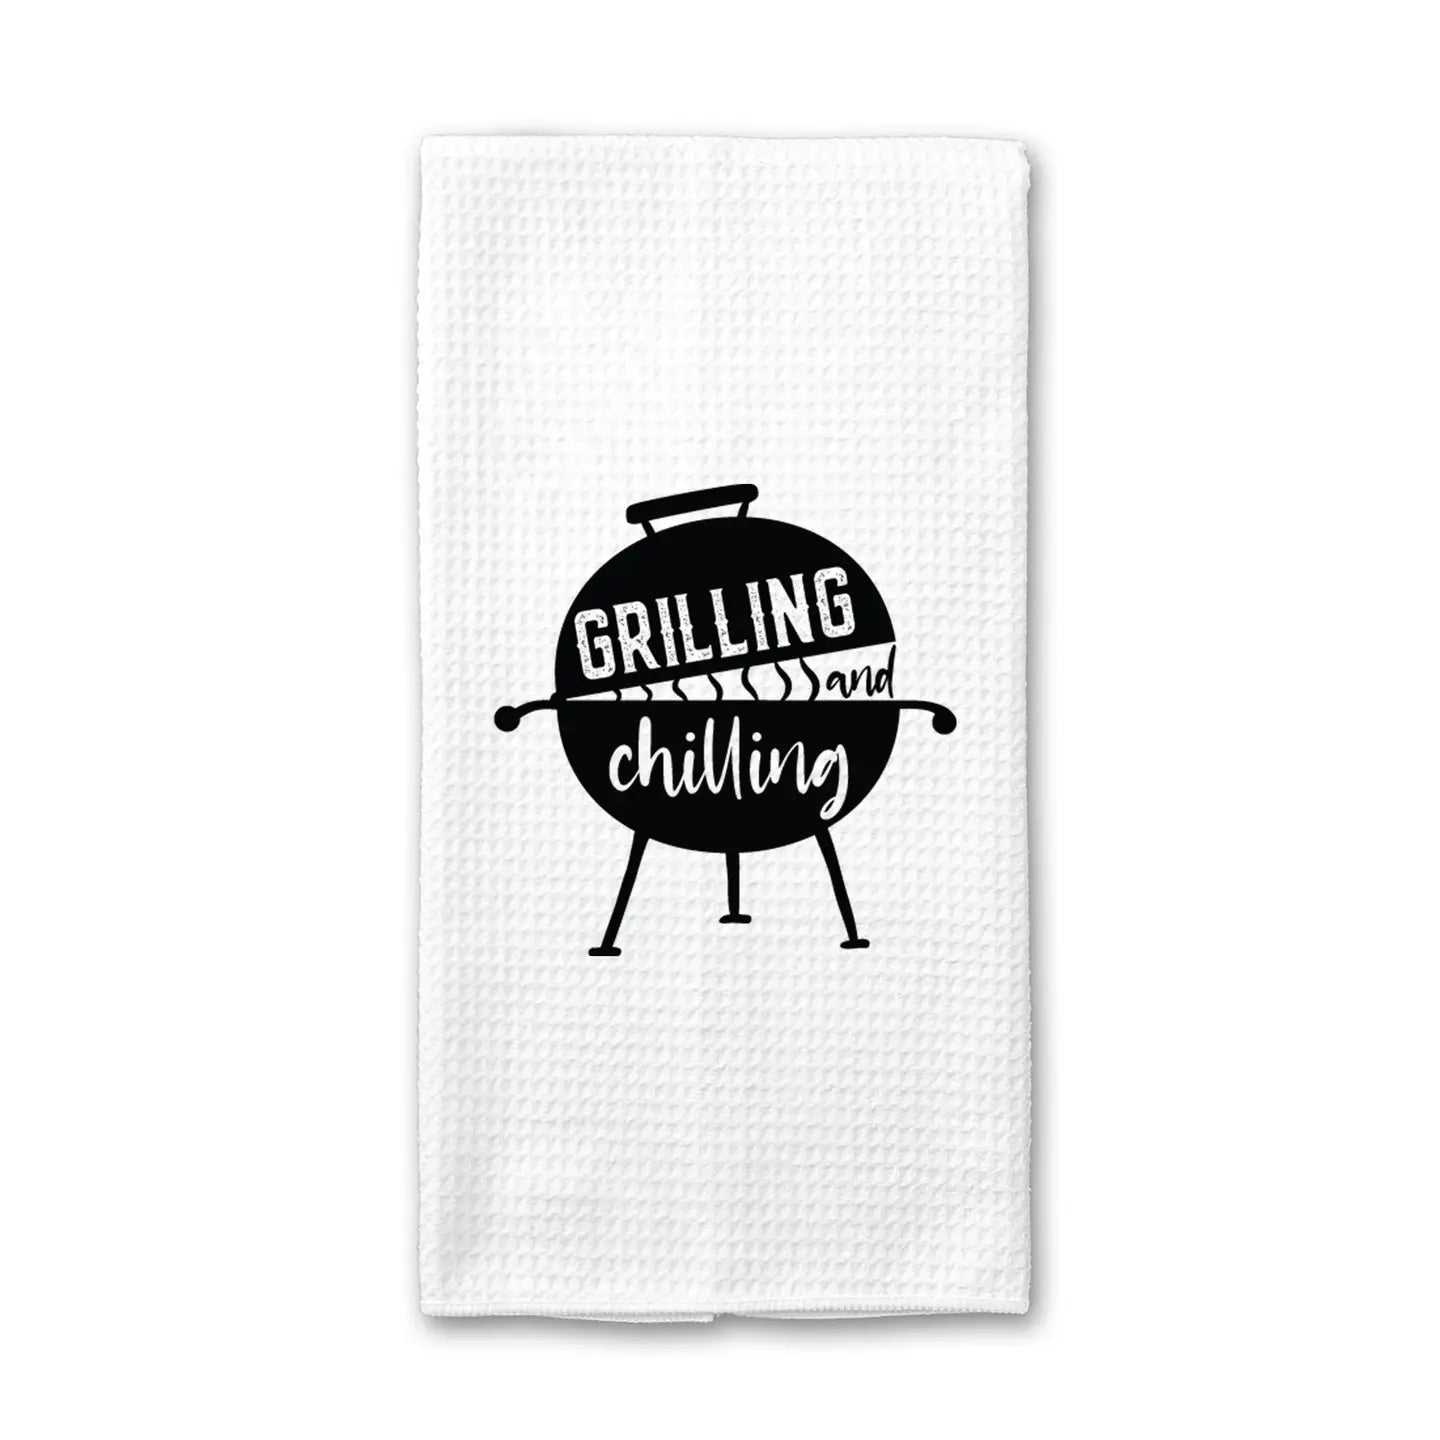 Grilling and Chilling towel